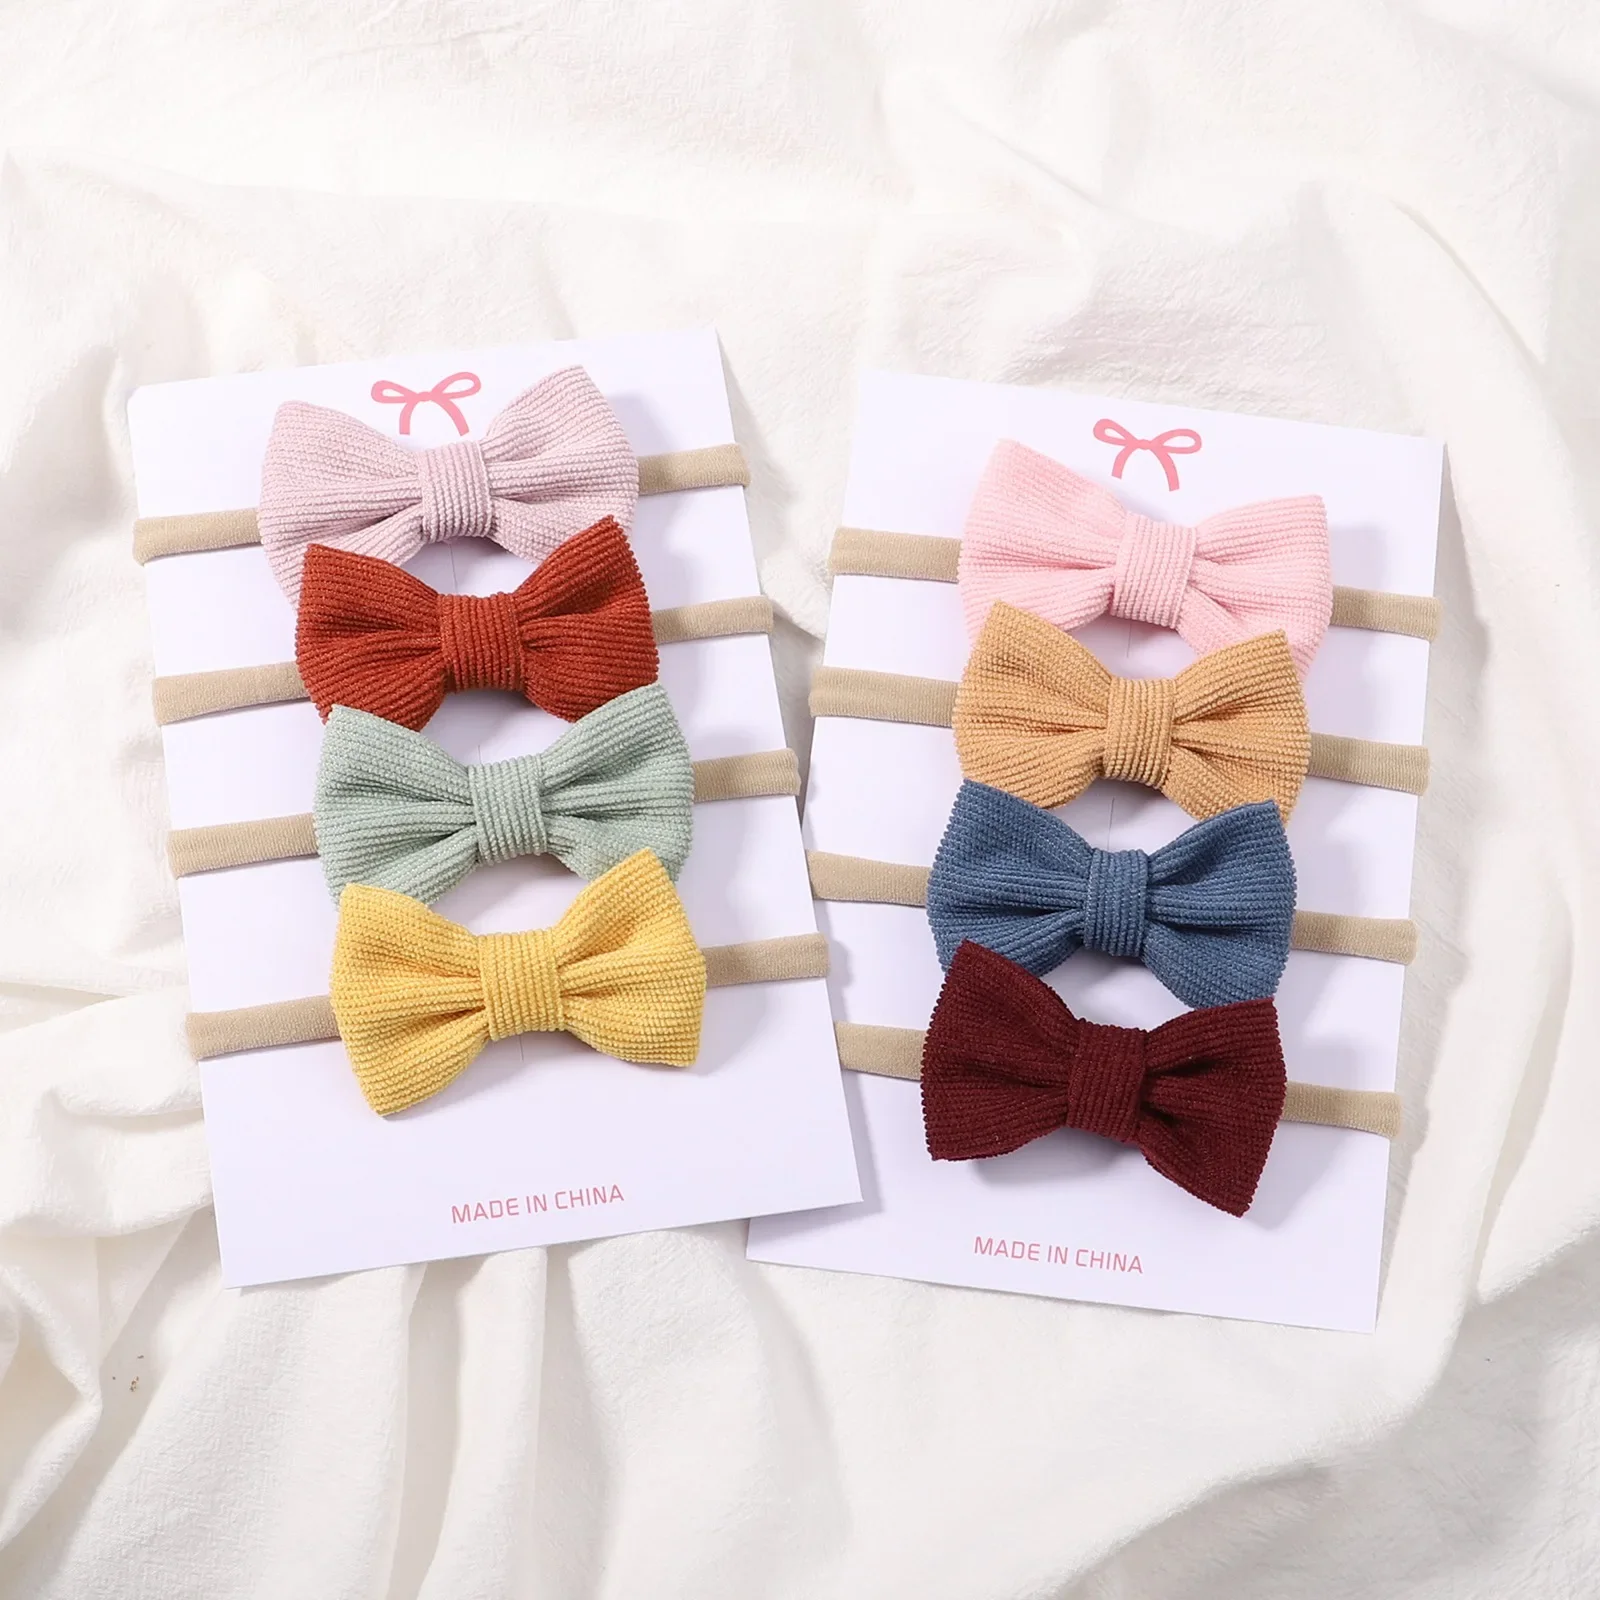 

1 Pcs Solid Color Kids Bows Headband for Baby Girl Cute Handmade Knitted Bowknot Children Hair Ties Headwear Baby Hair Accessory